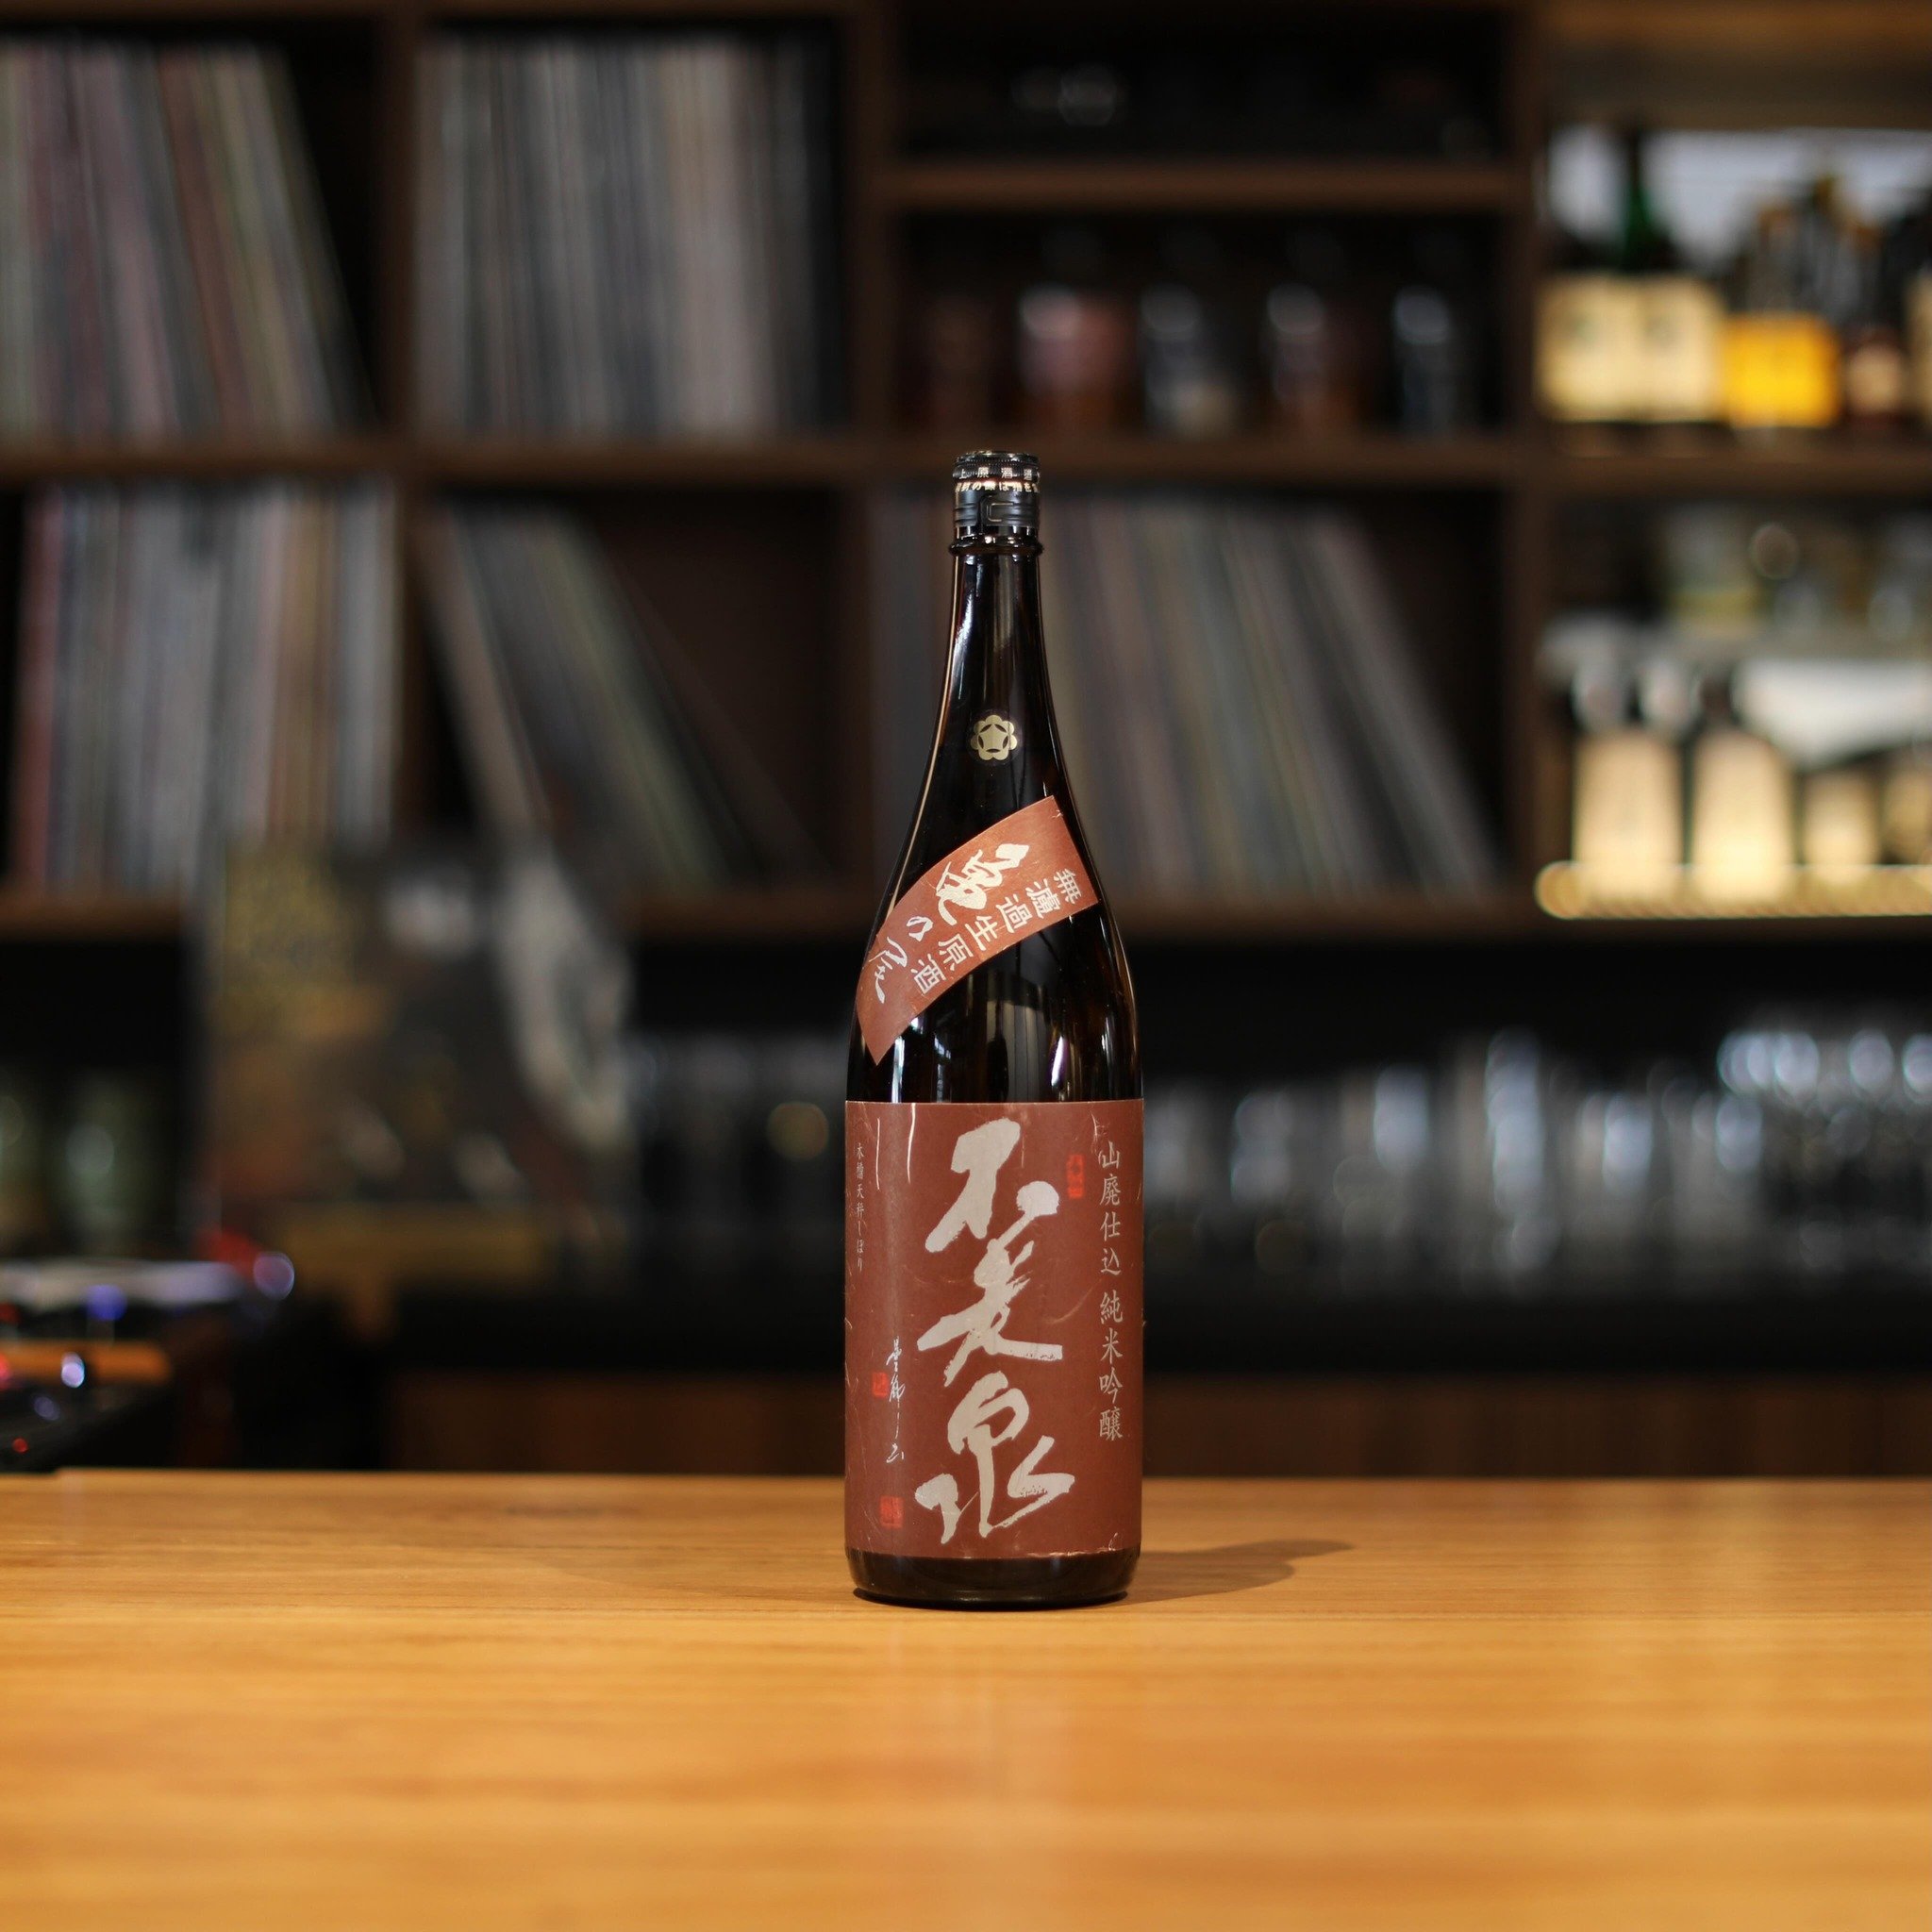 Uehara Shuzo &lsquo;Furosen Kameno-o&rsquo; from Shiga. Uehara make some our favourite sake and this is no exception. Delicious!

Open all weekend, every weekend 😎

Saturday + Sunday ~ 12pm - late

#antesyd #sakebar